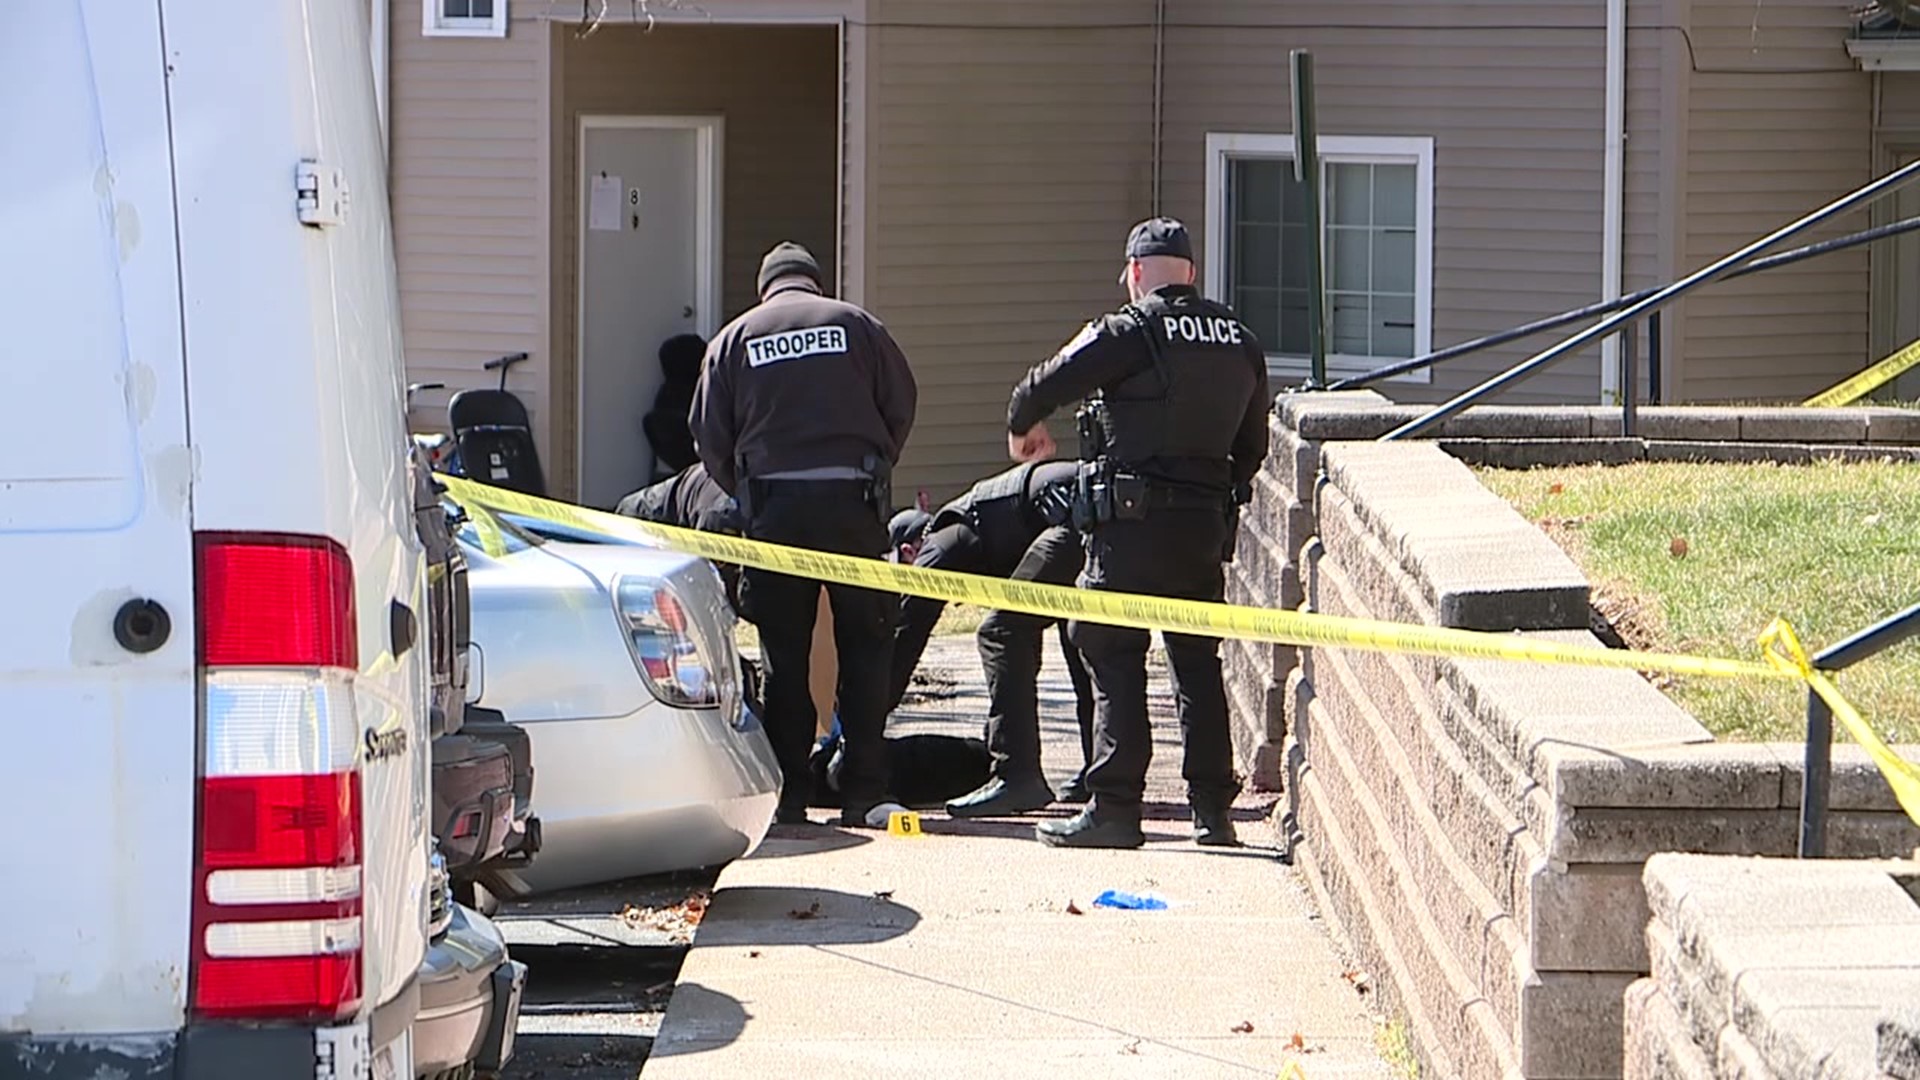 A man was taken to the hospital after getting shot several times at an apartment complex in Edwardsville.